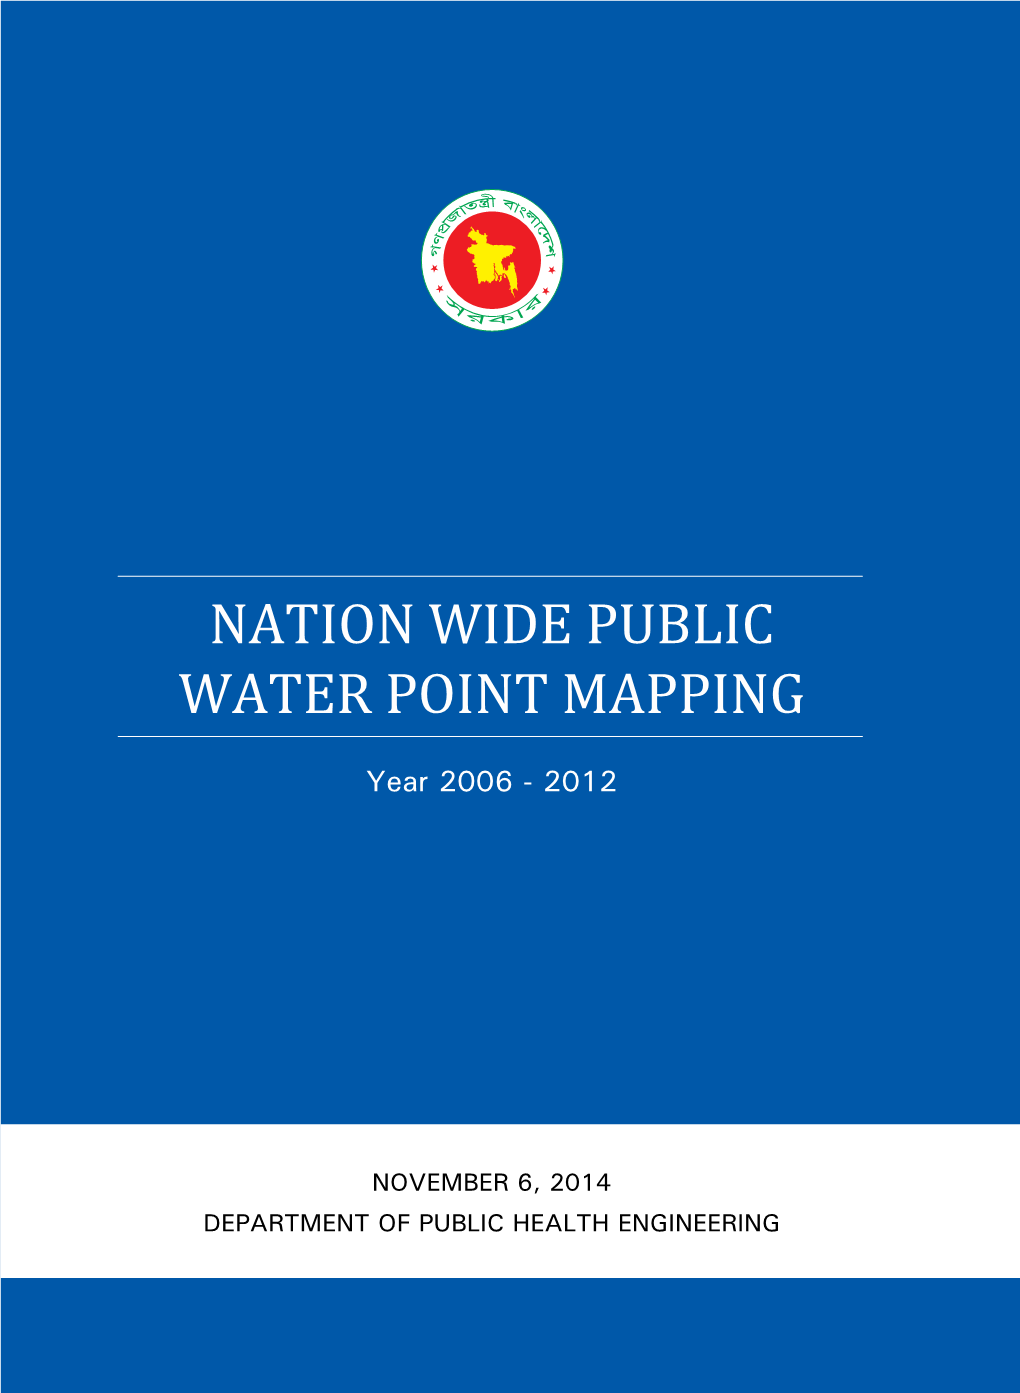 NATION WIDE PUBLIC WATER POINT MAPPING | a Department of Public Health Engineering (DPHE)